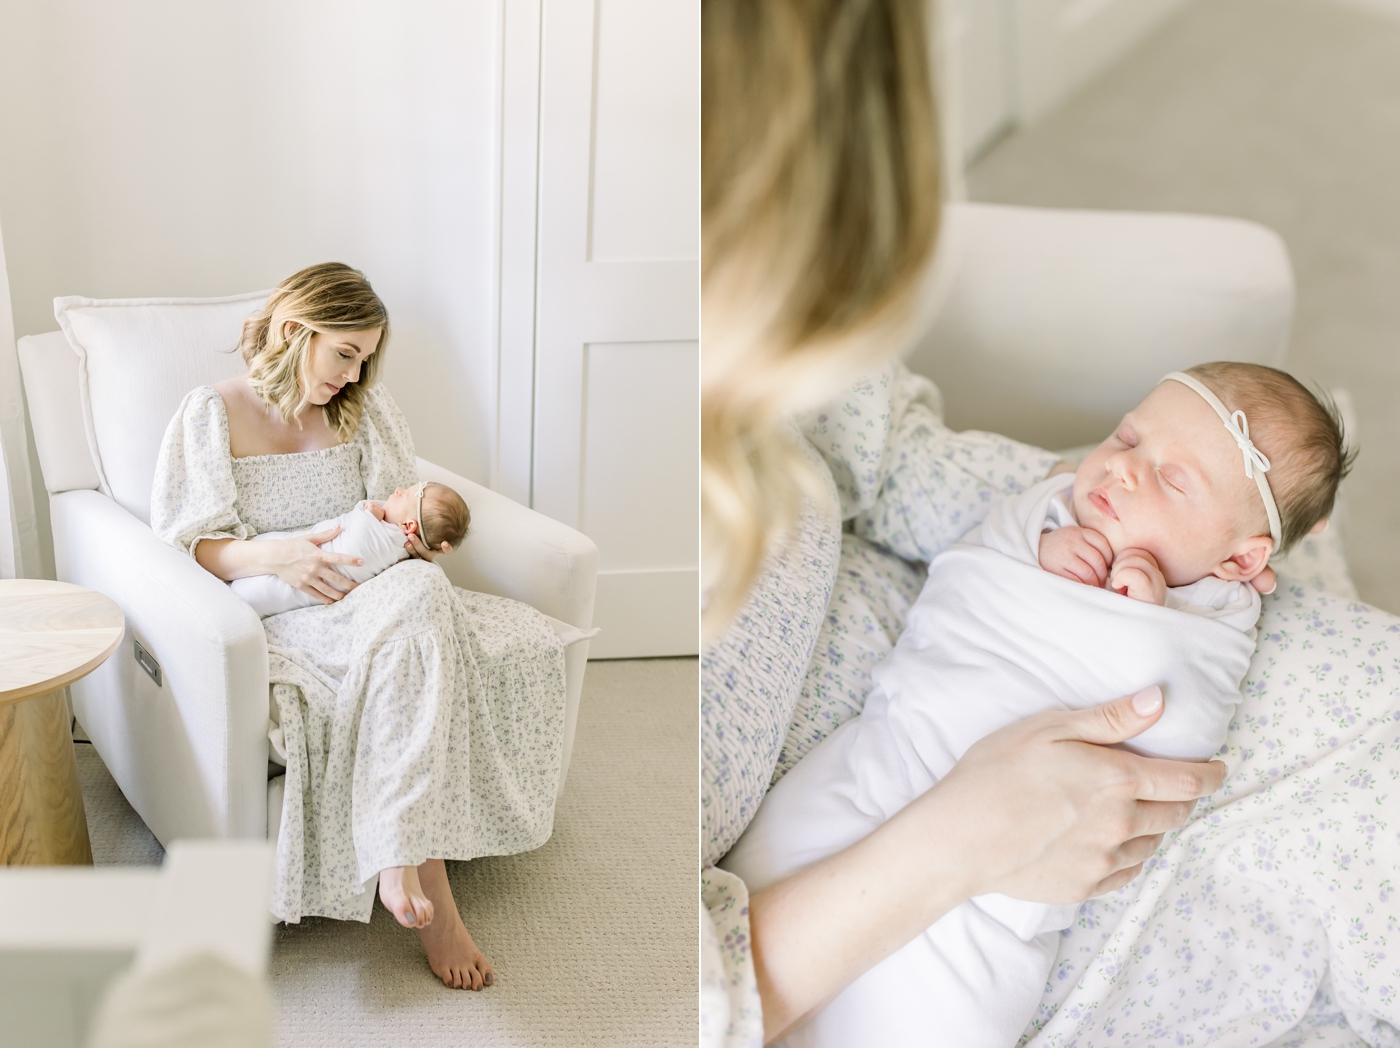 Mom sitting in a glider holding her new baby girl | Photo by Caitlyn Motycka Photography.